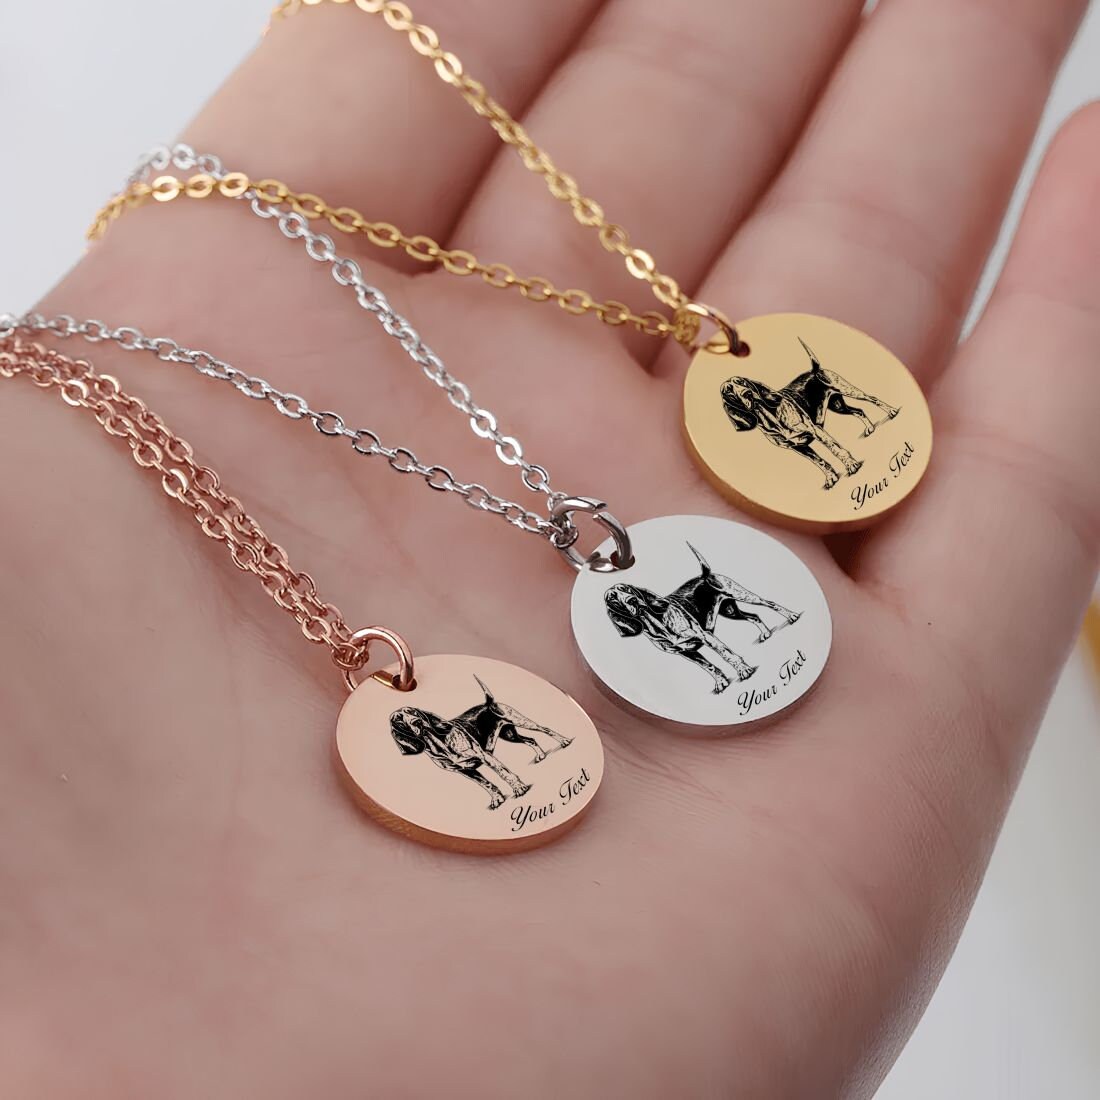 Coonhound Dog Portrait Necklace - Personalizable Jewelry